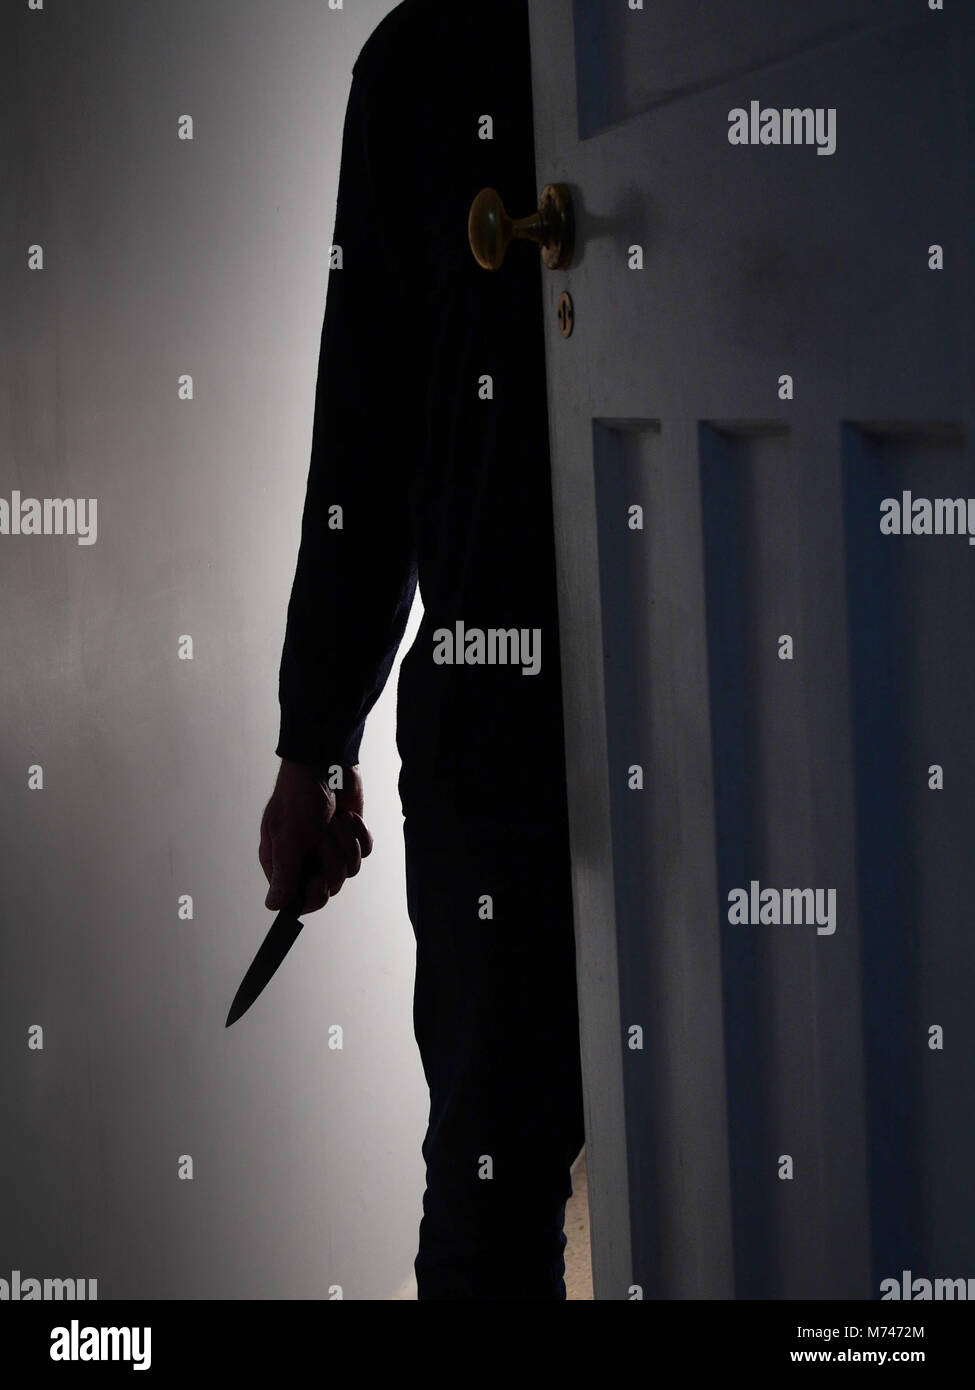 Silhouette of unrecognisable man with knife looking threatening in a doorway Stock Photo